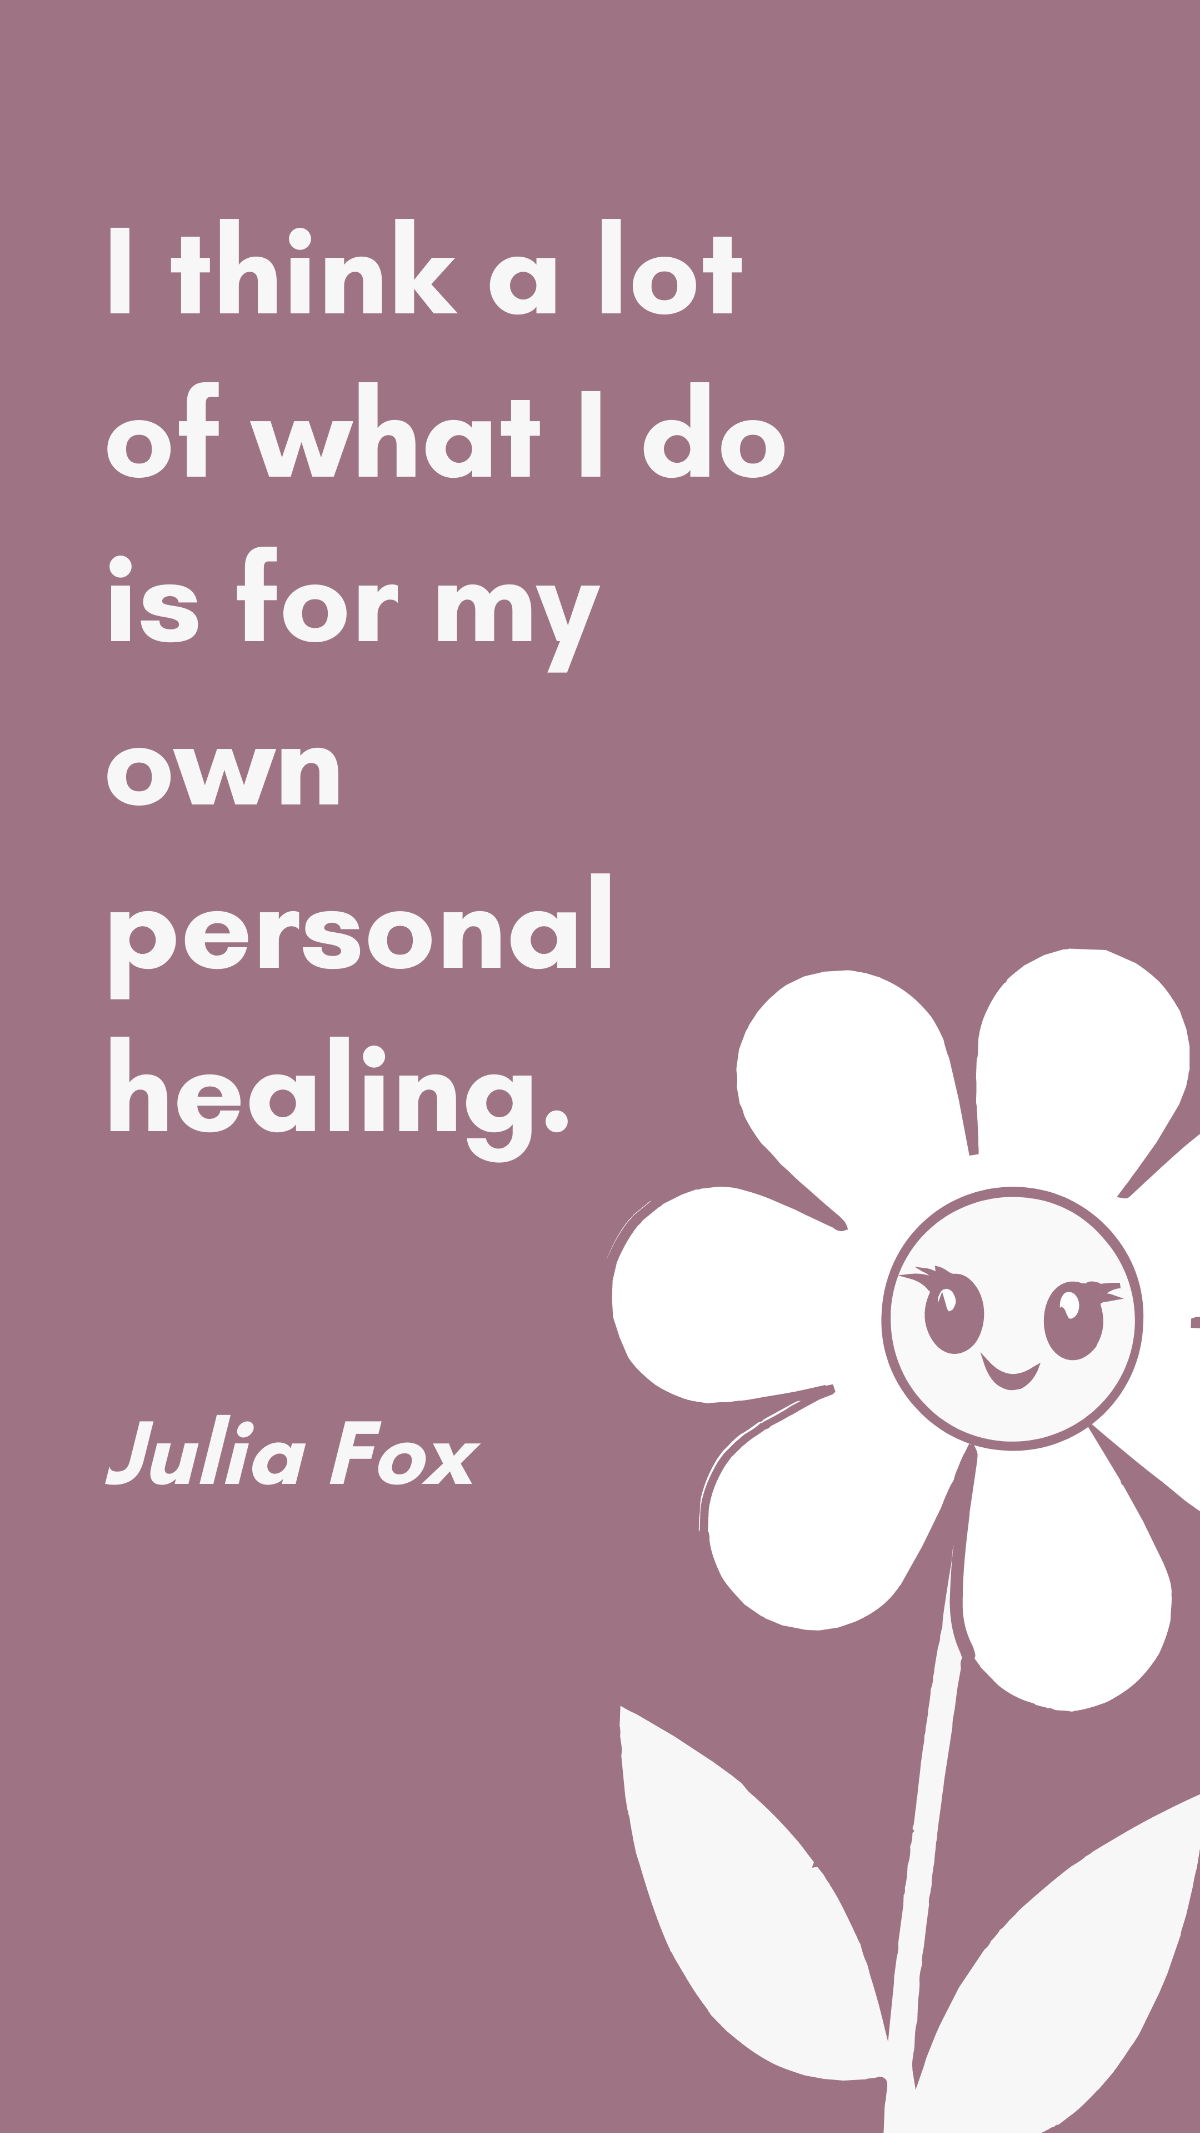 Free Julia Fox - I think a lot of what I do is for my own personal healing. Template